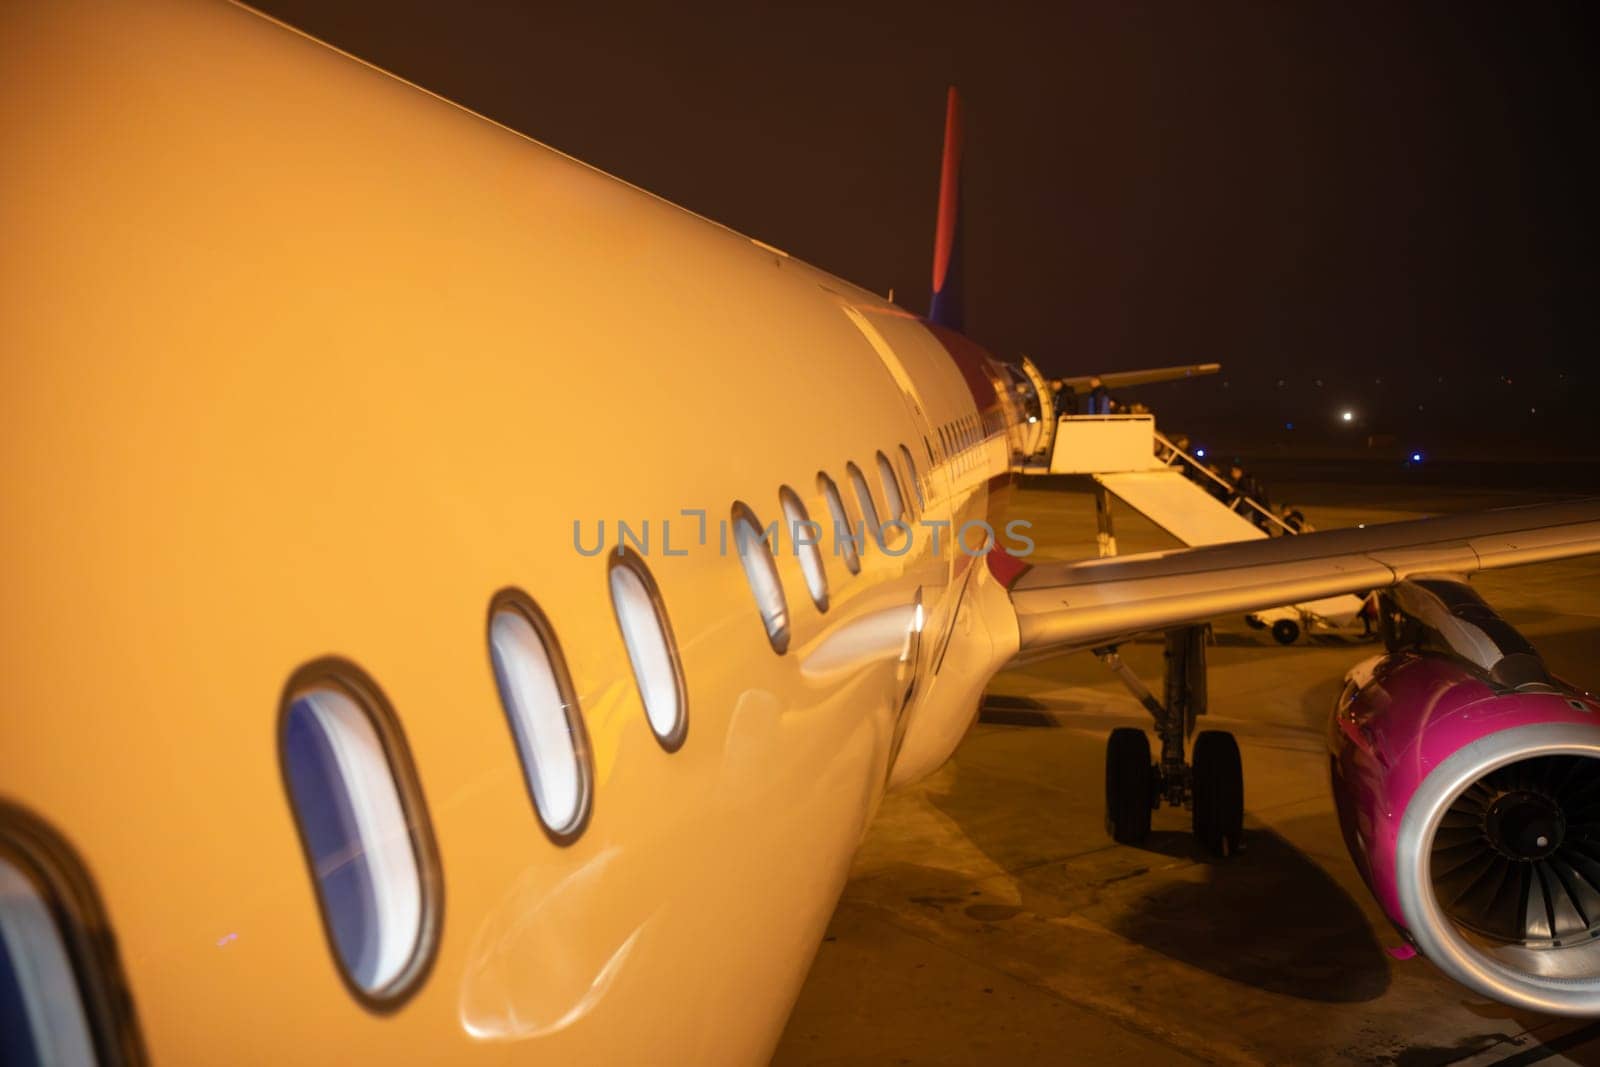 A captivating night view of an airplane, highlighting its design and features.